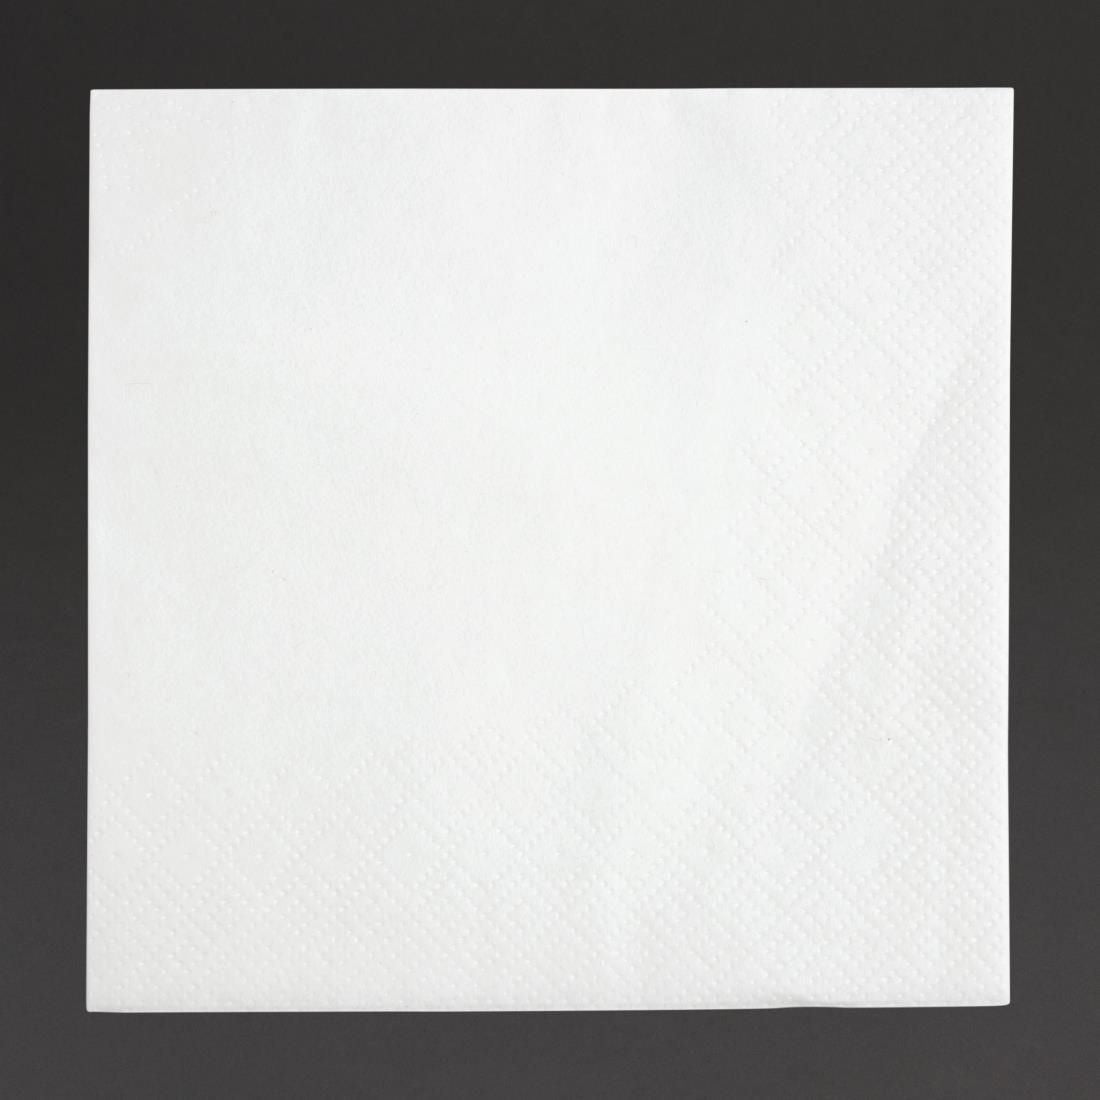 Fiesta Cocktail Napkins White 240mm (Pack of 4000) JD Catering Equipment Solutions Ltd